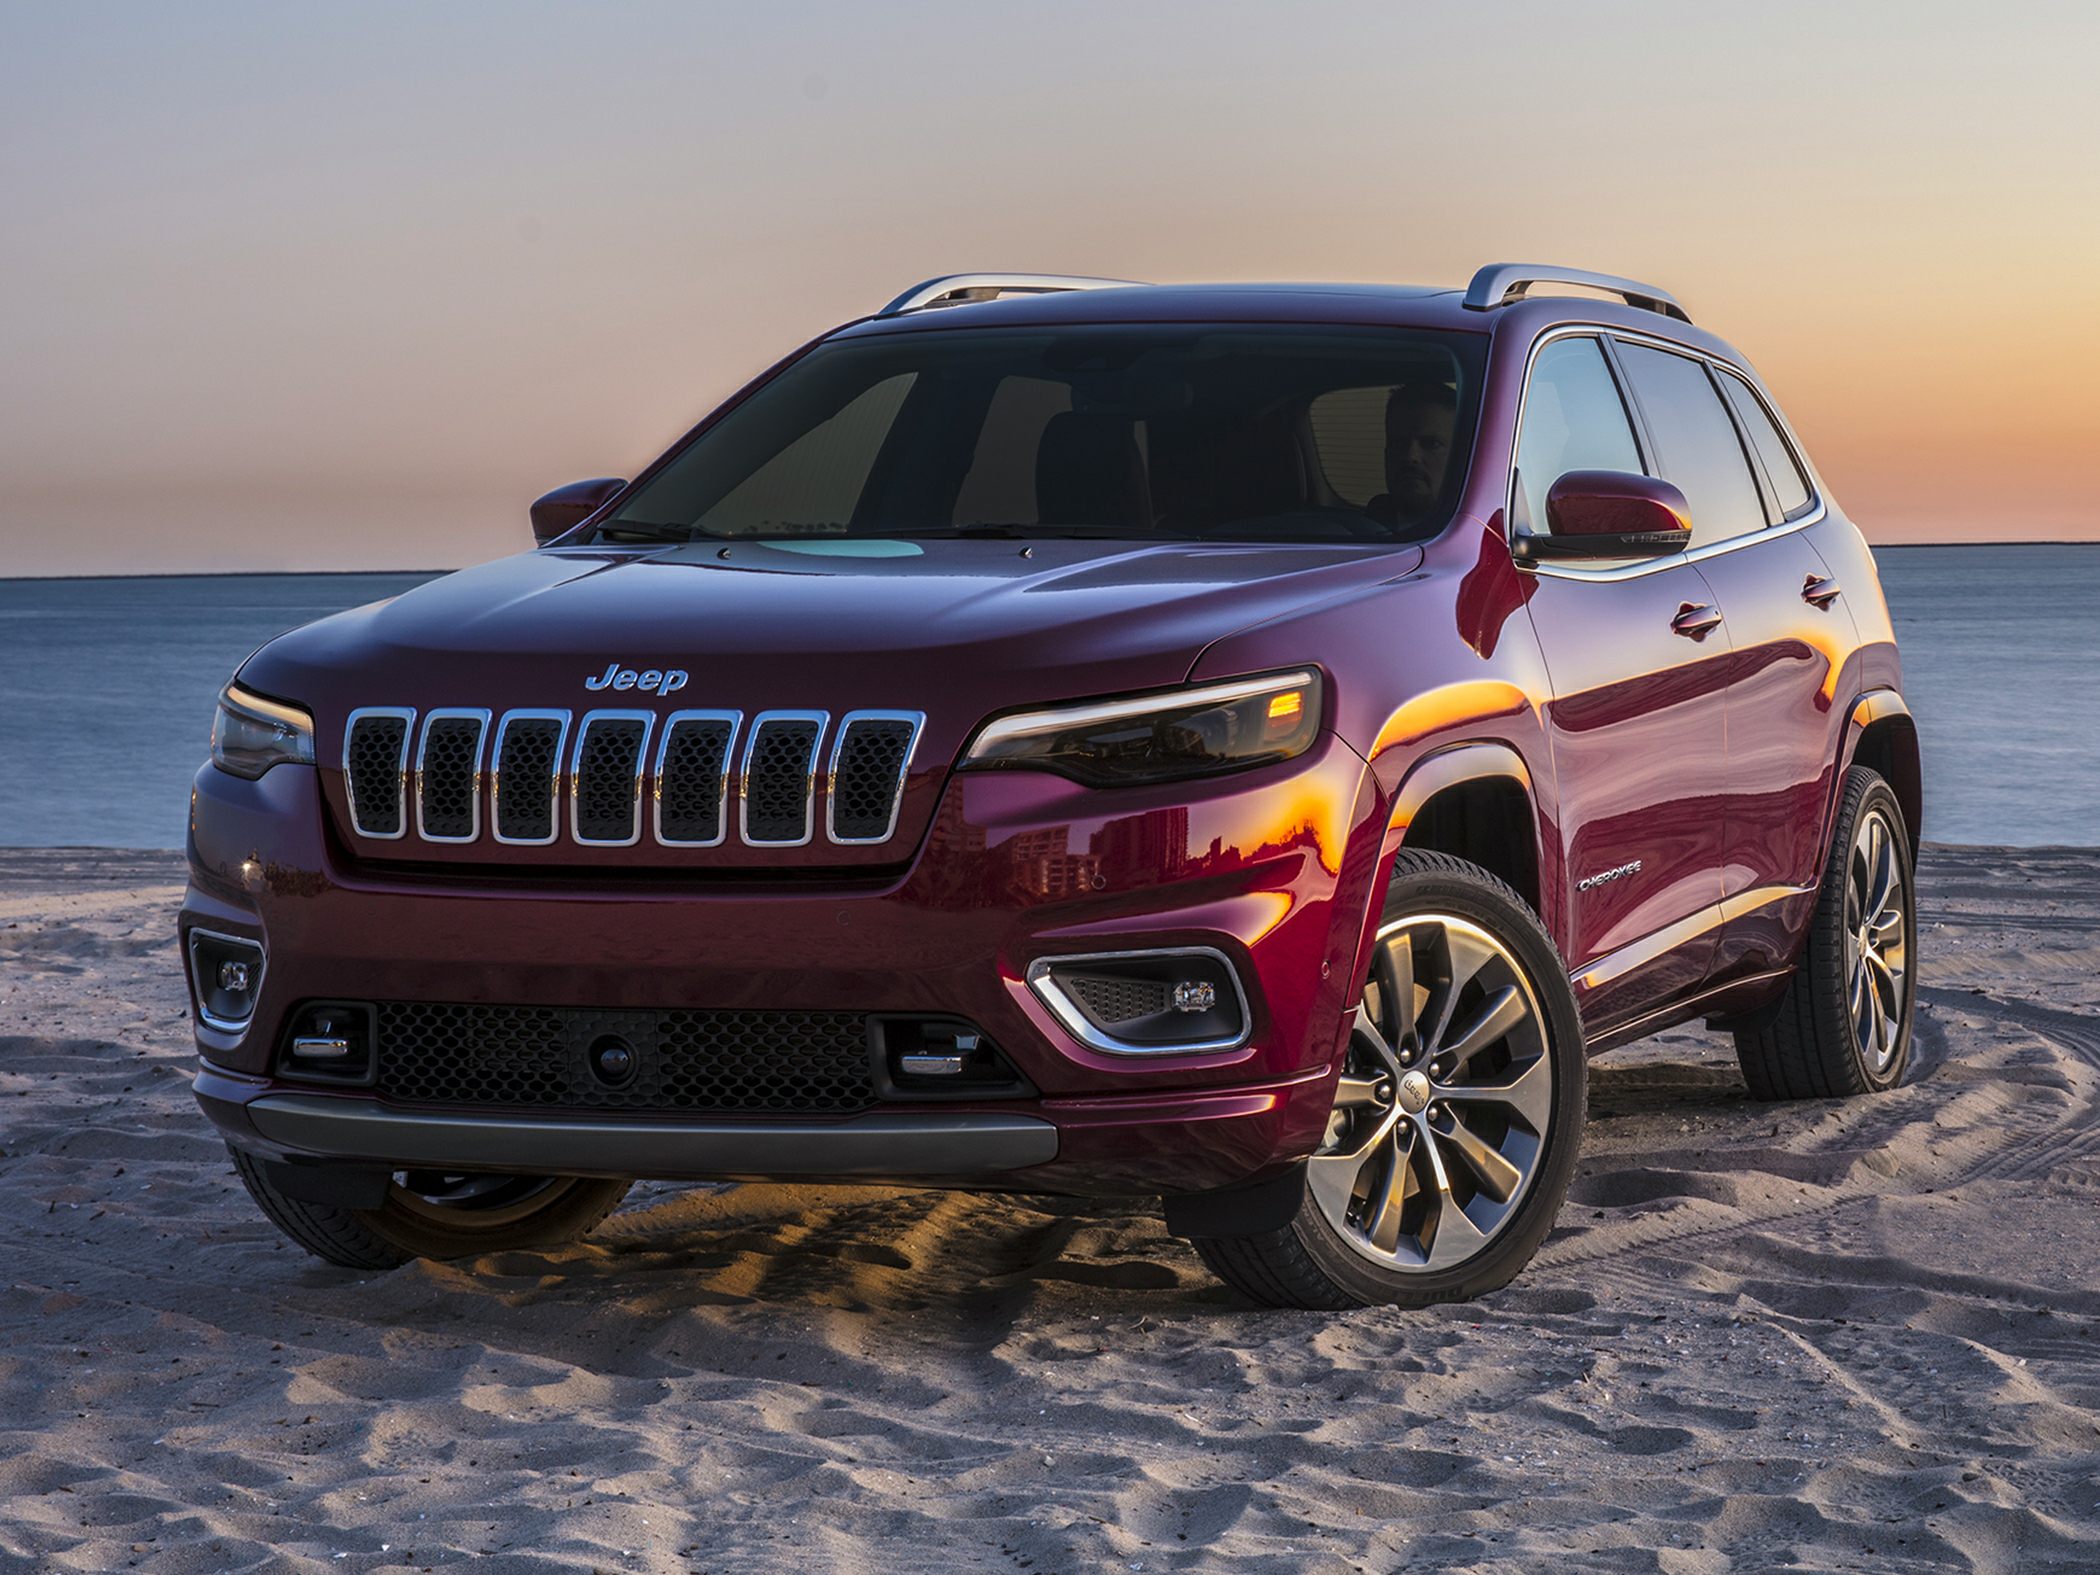 2021 Jeep Cherokee Deals Prices Incentives Leases Overview 